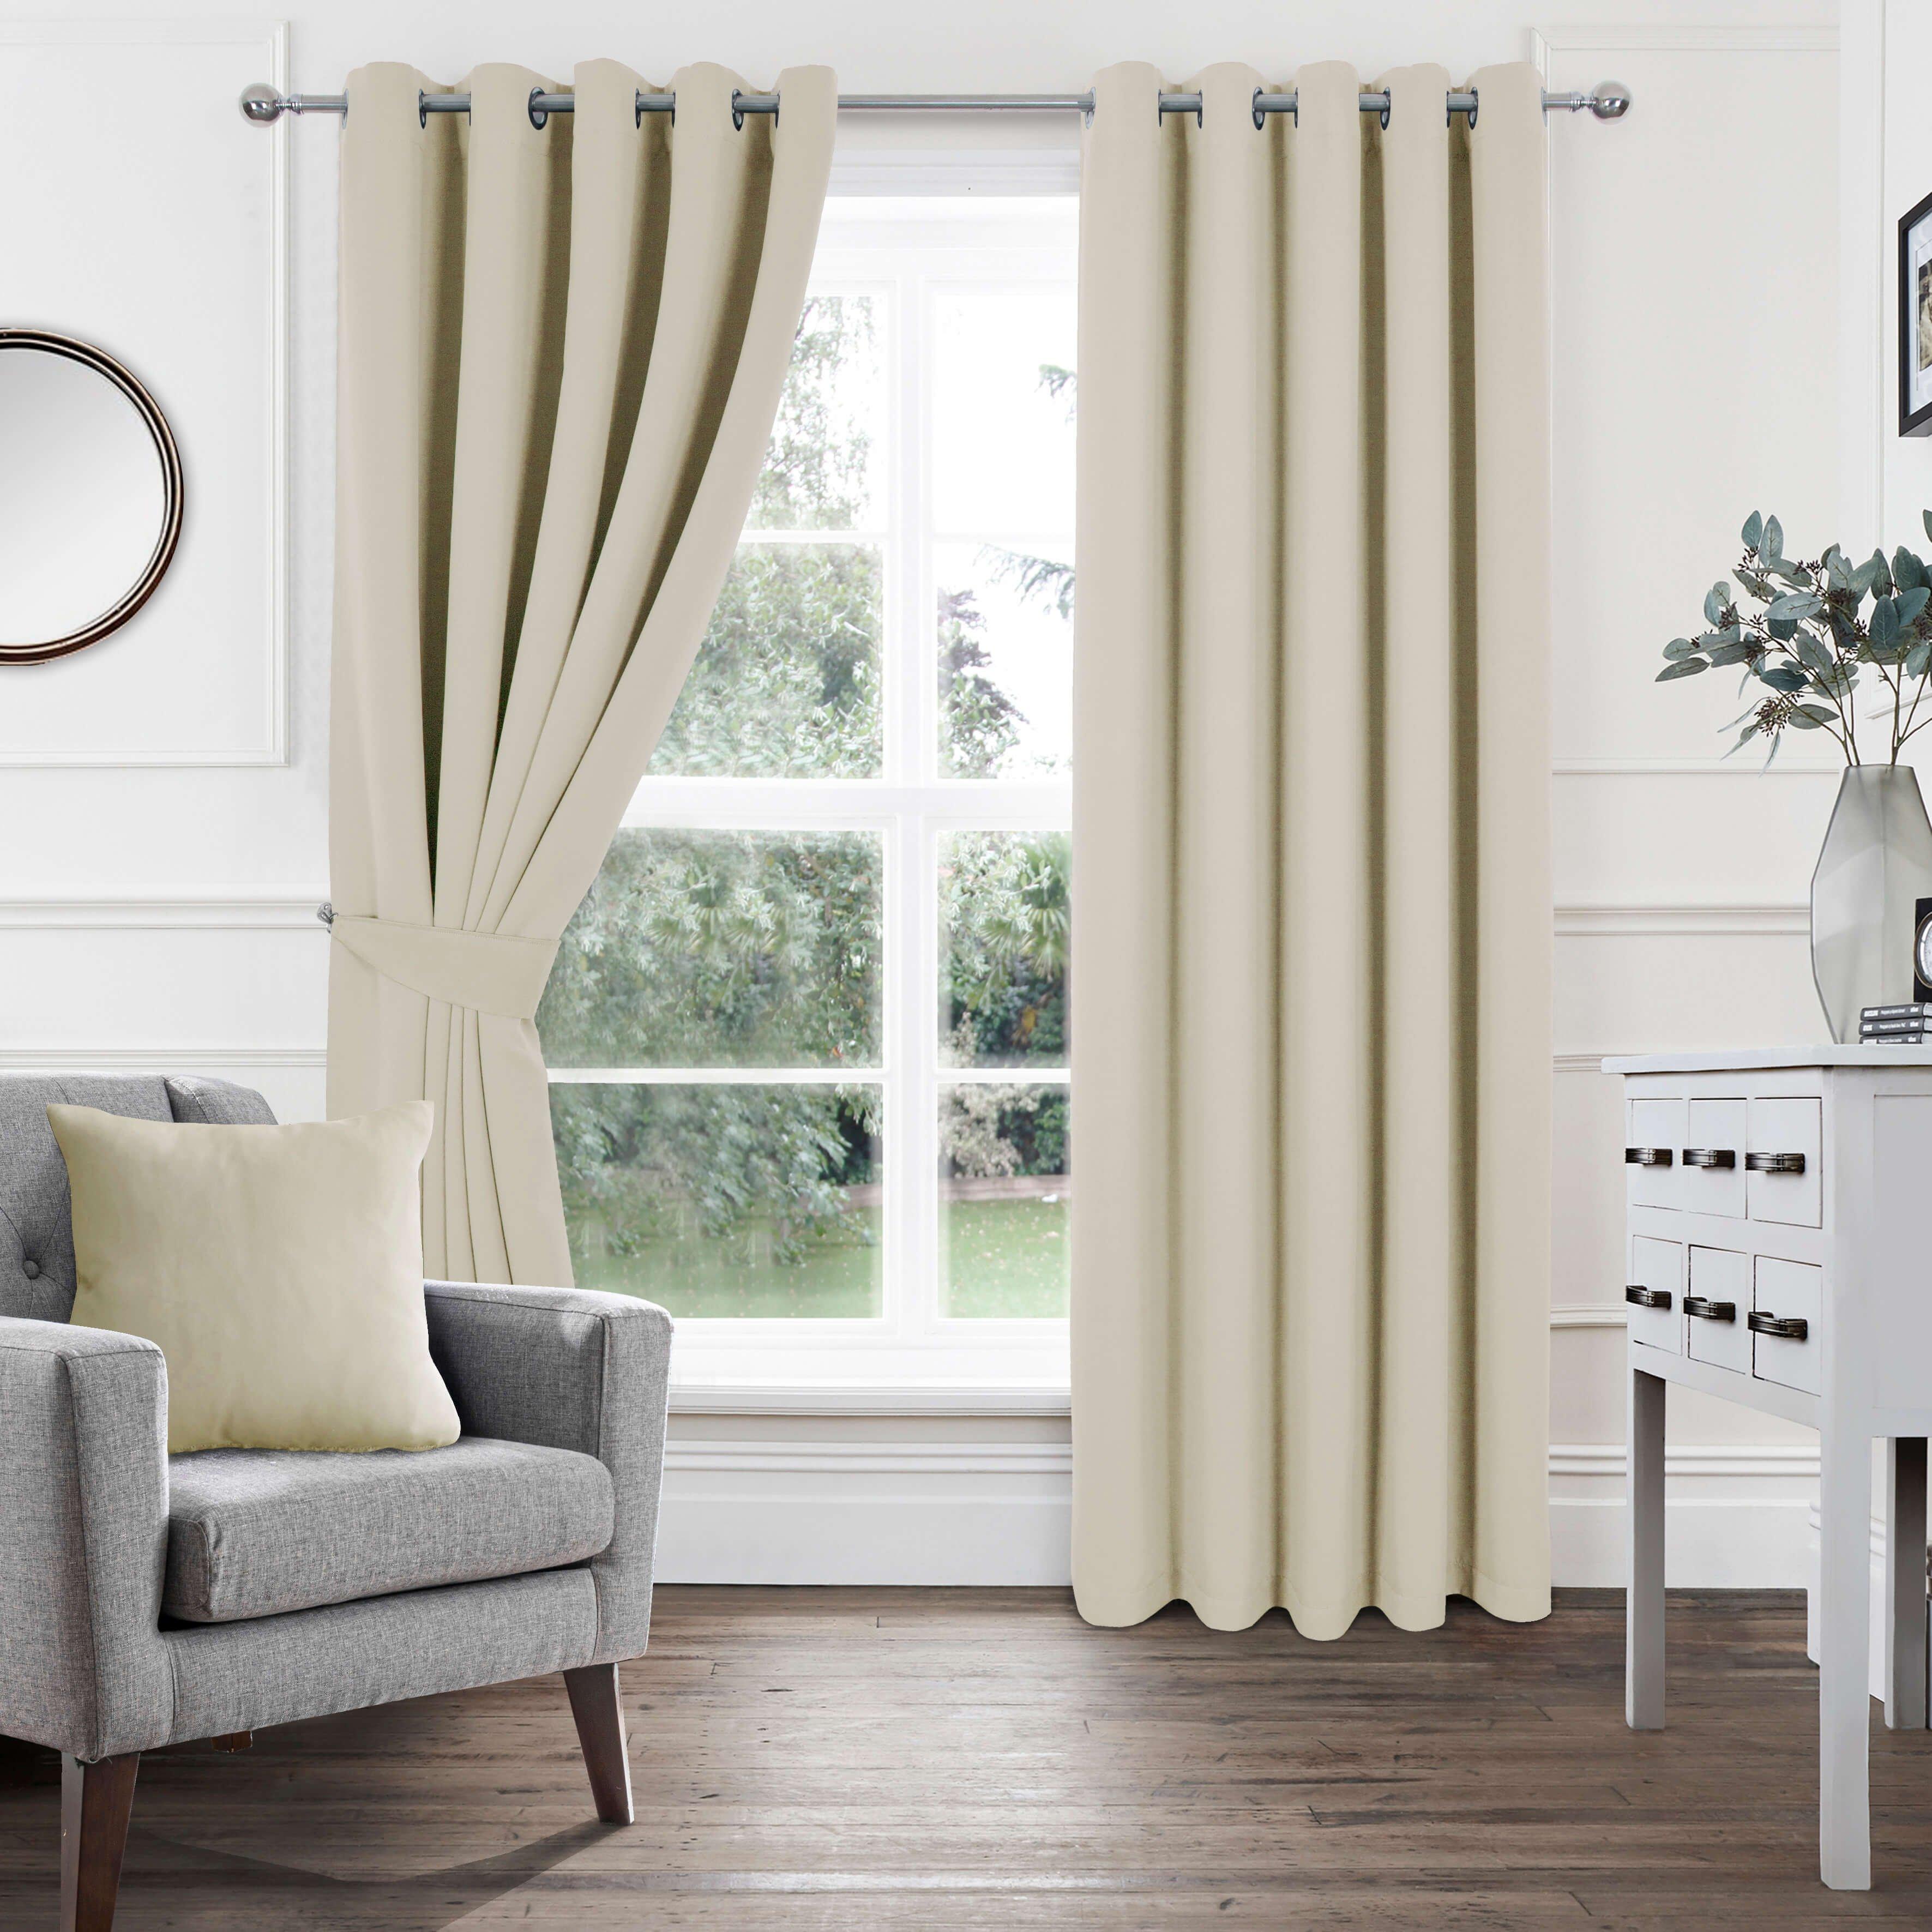 Woven Blockout Eyelet Curtains pair